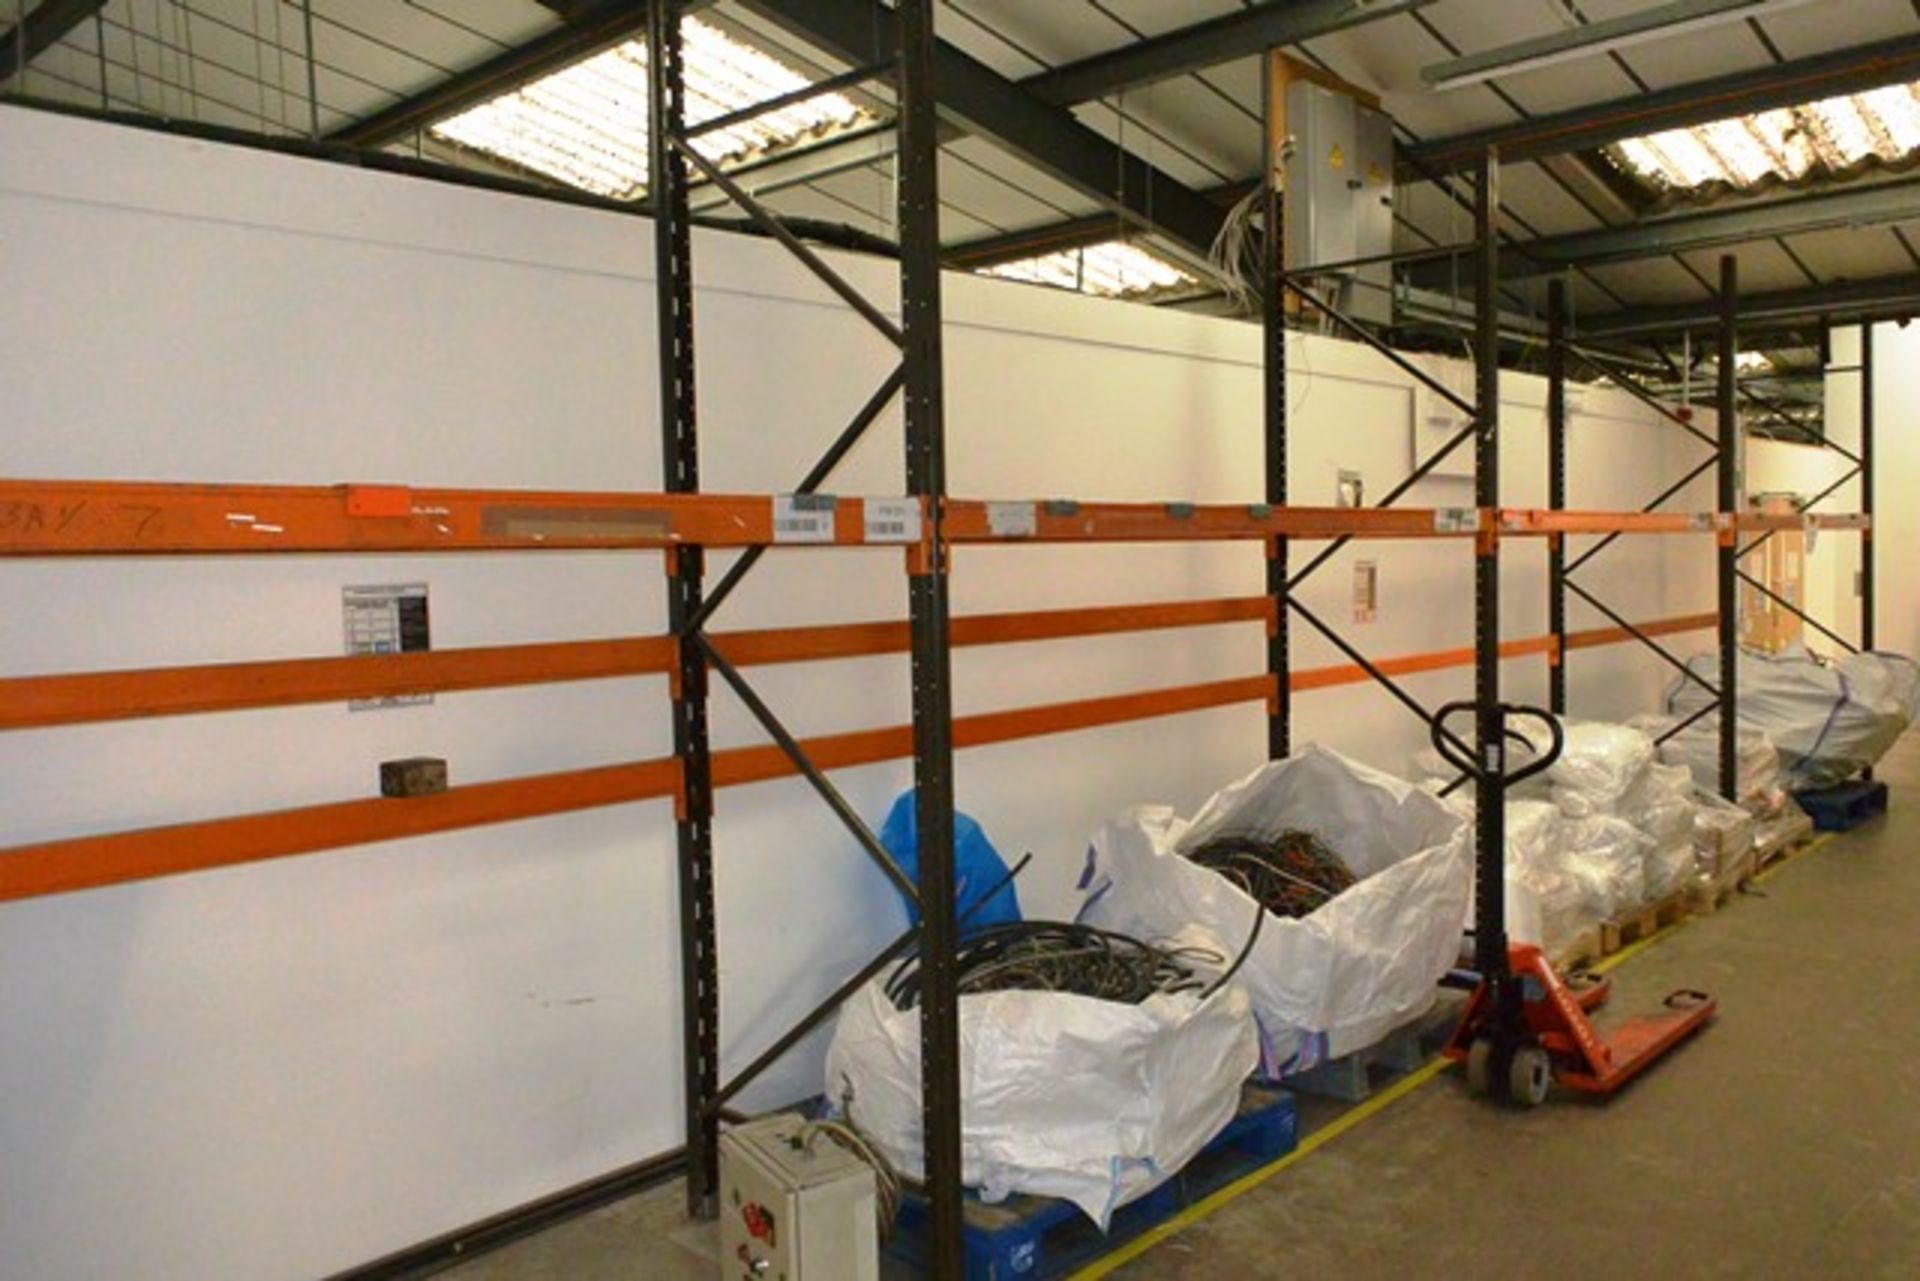 Four bays of adjustable boltless pallet racking, approx height 3000mm, approx bay width 2750mm (